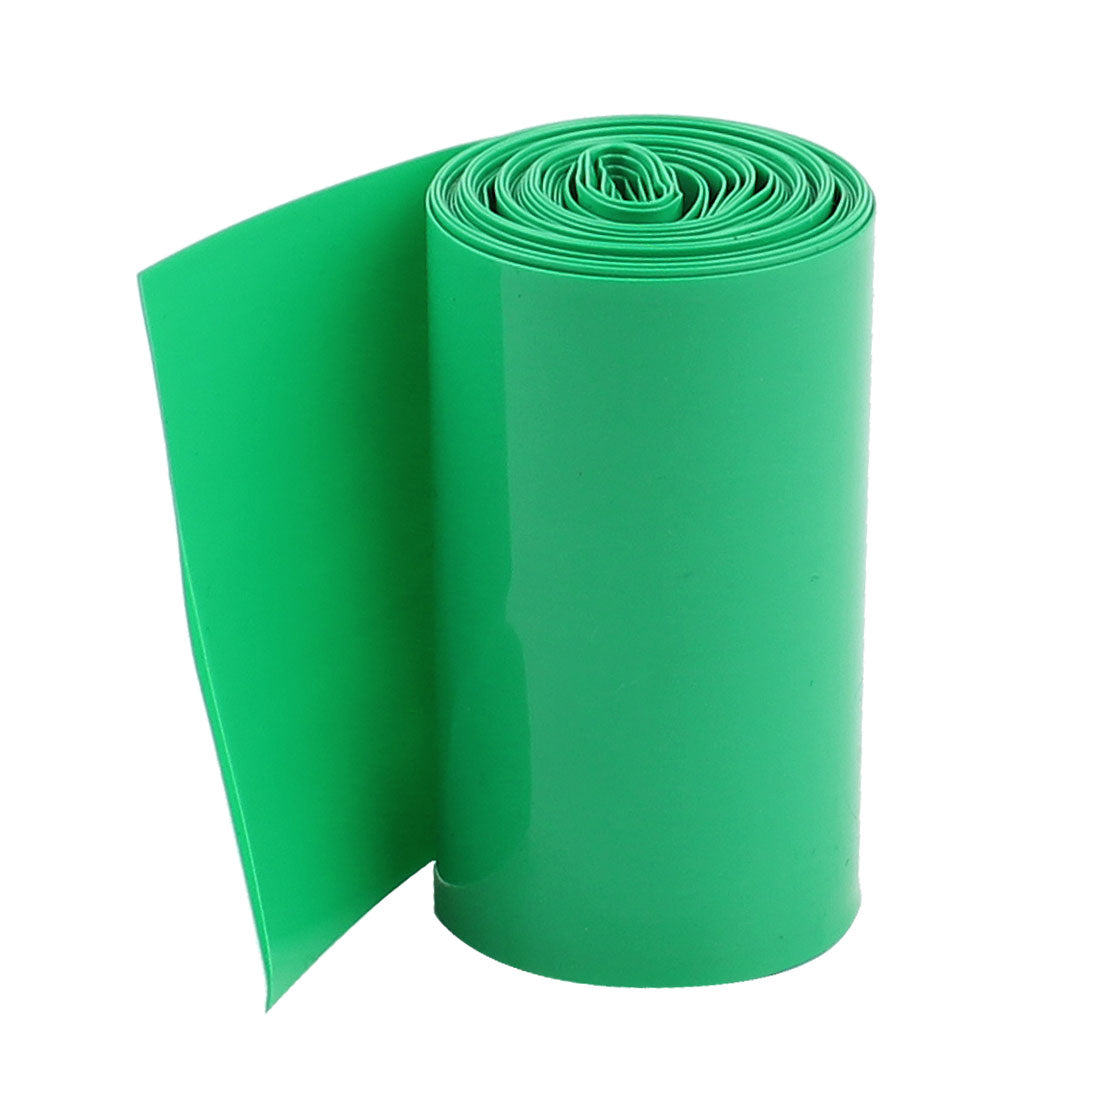 uxcell Uxcell 2Meters Length 50mm Dark Green PVC Heat Shrinkable Tubing Heatshrink Wrap Cover for 2 x 18650 Battery